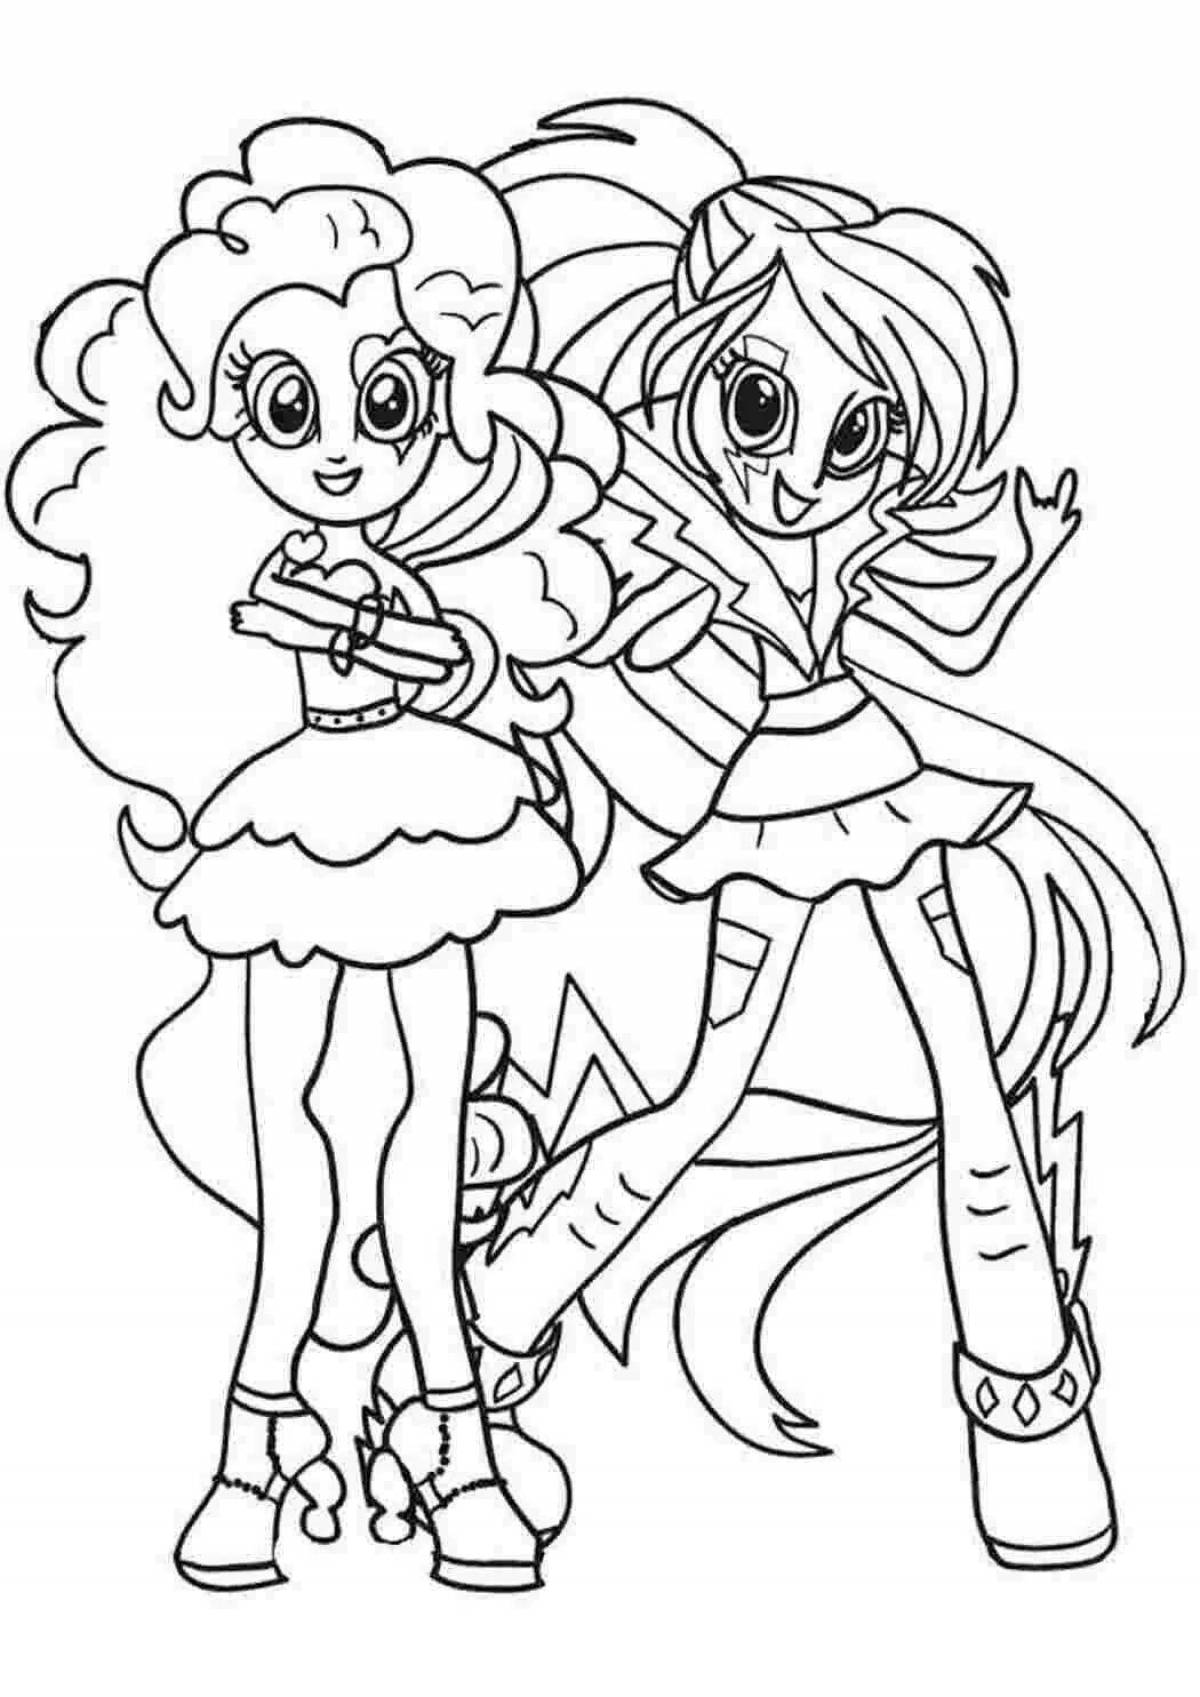 Colouring my little pony girls for kids